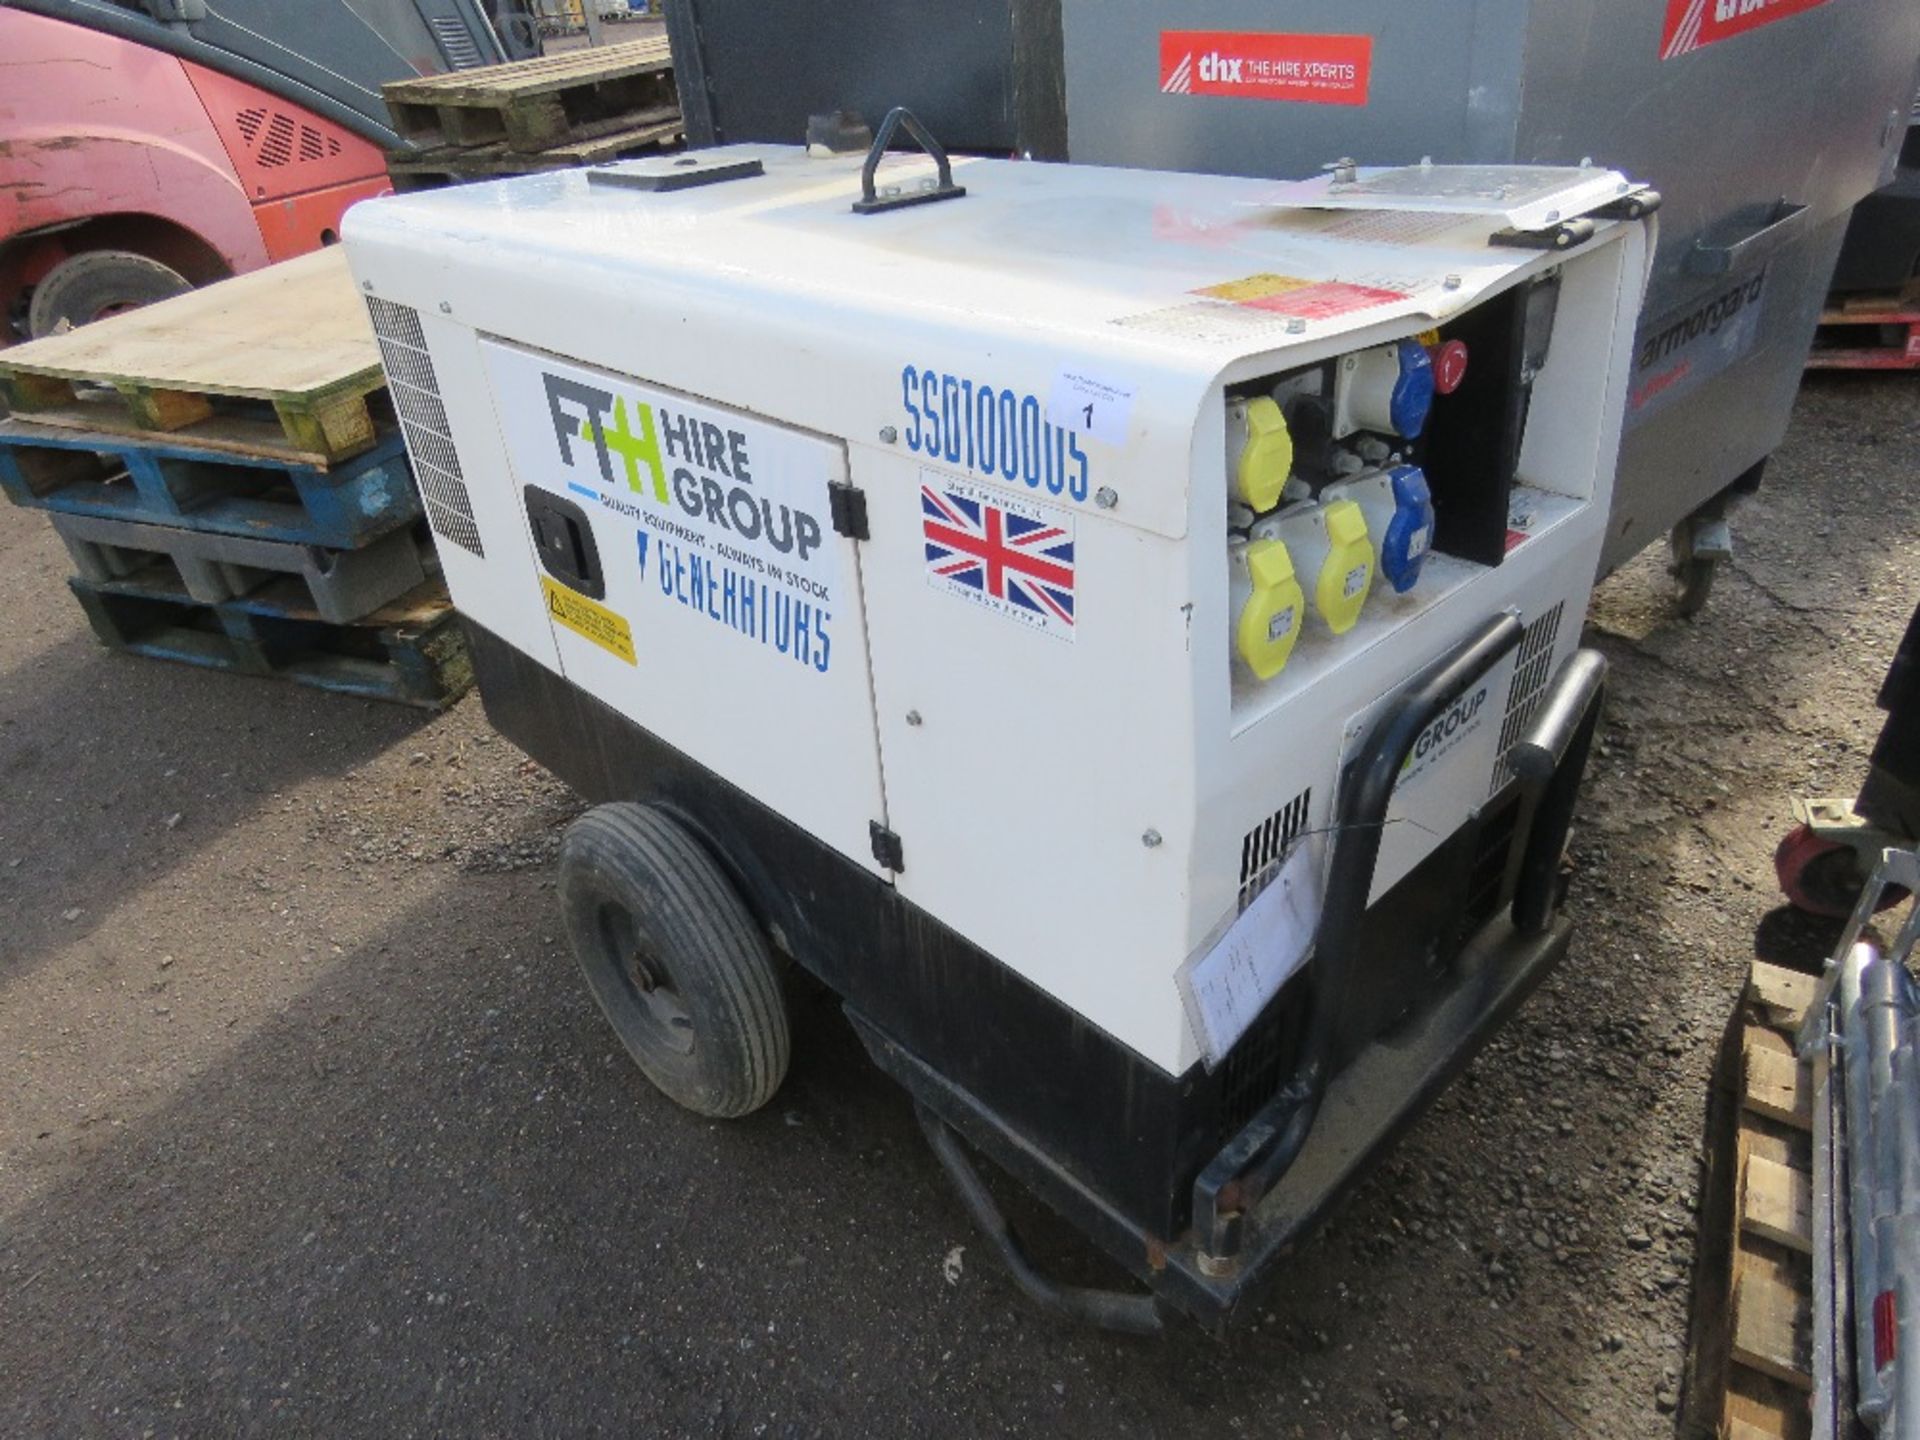 STEPHILL 10KVA BARROW GENERATOR. WHEN TESTED WAS SEEN TO RUN AND SHOWED POWER ON GUAGE. KUBOTA ENGIN